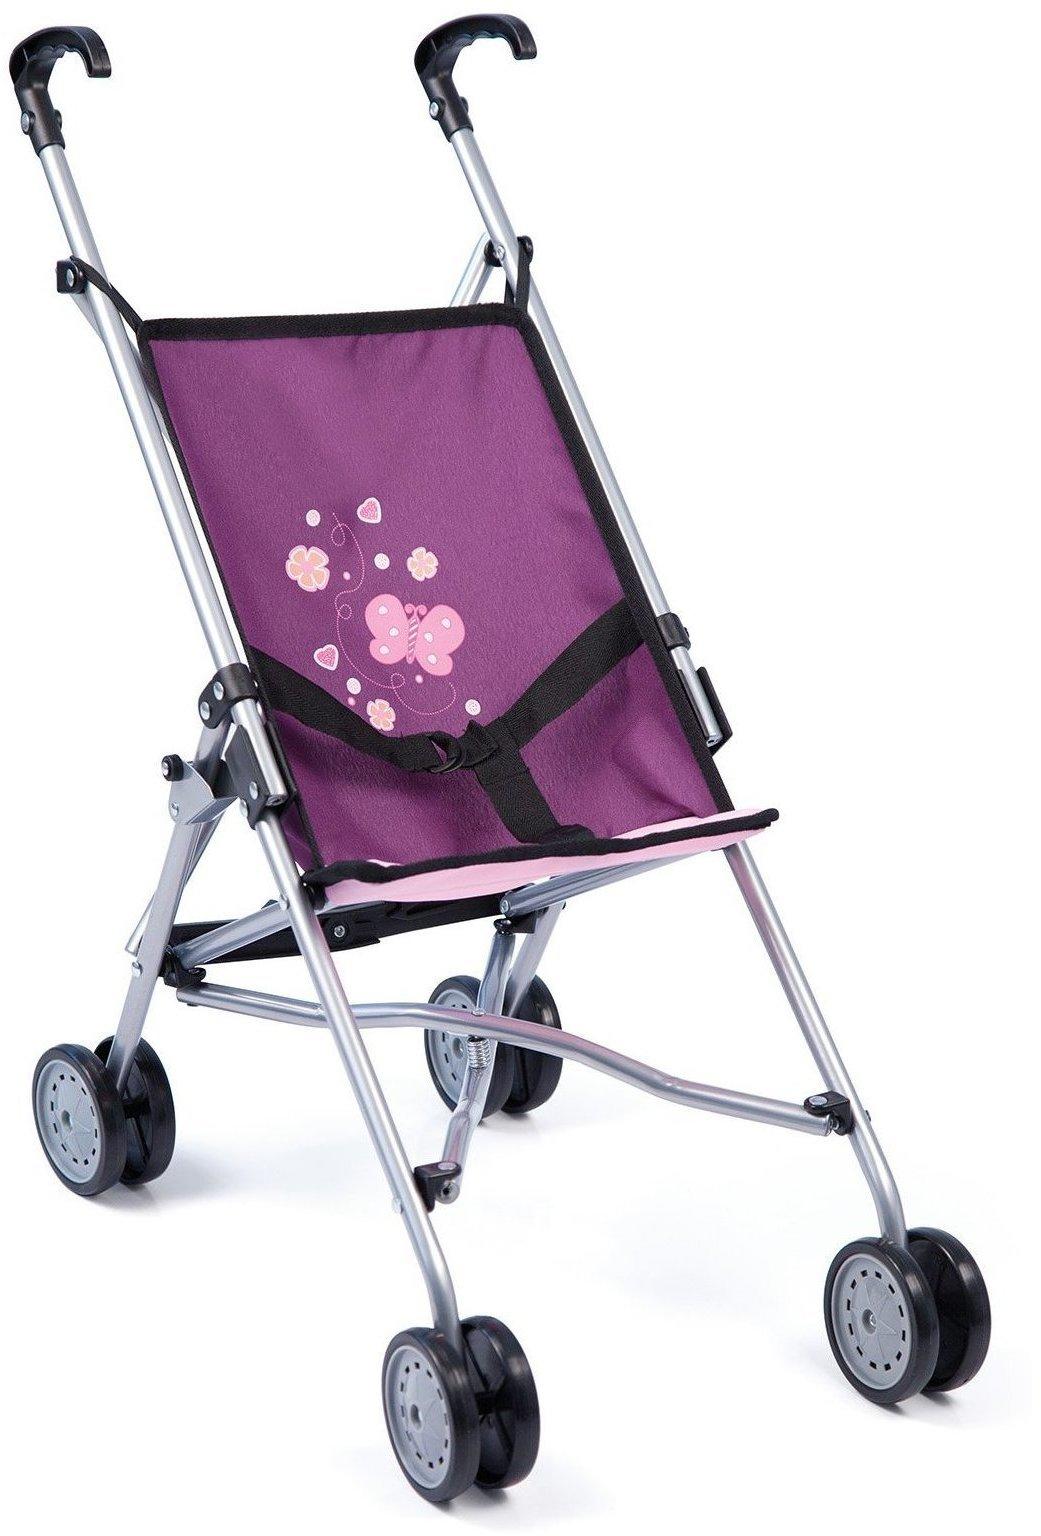 Bayer Design Puppen-Buggy Butterfly pflaume (30157) Test: ❤️ TOP Angebote  ab 11,20 € (August 2022) Testbericht.de